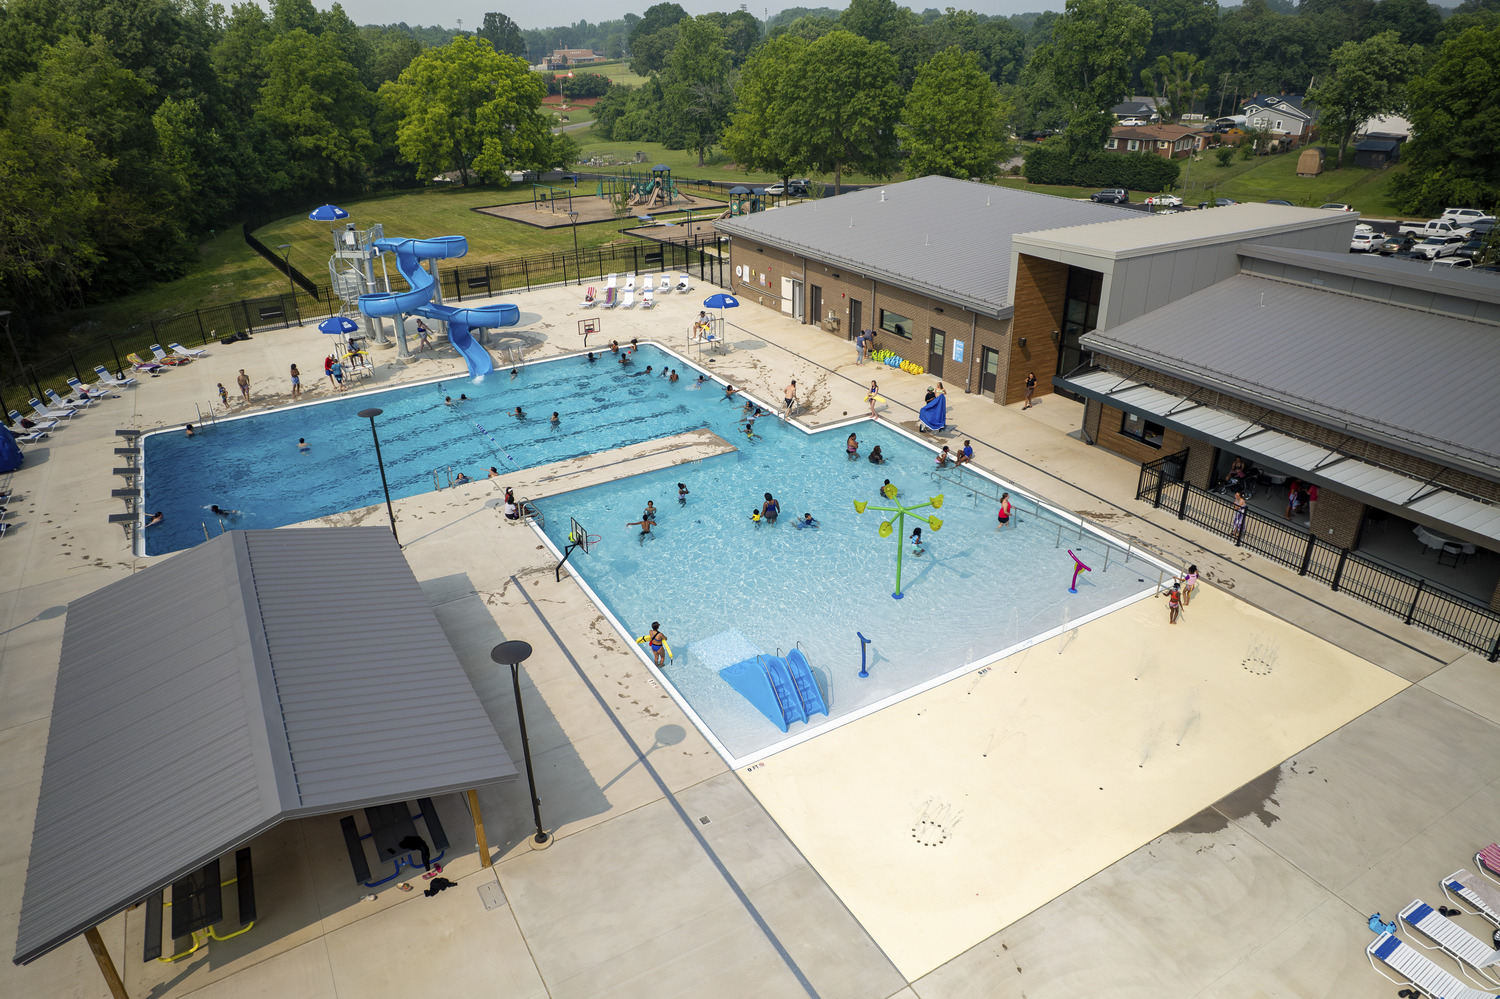 Image shows the pools and community center at the Thomasville Aquatic and Community Center. A playground can be seen in the background. There are people playing in the pool.